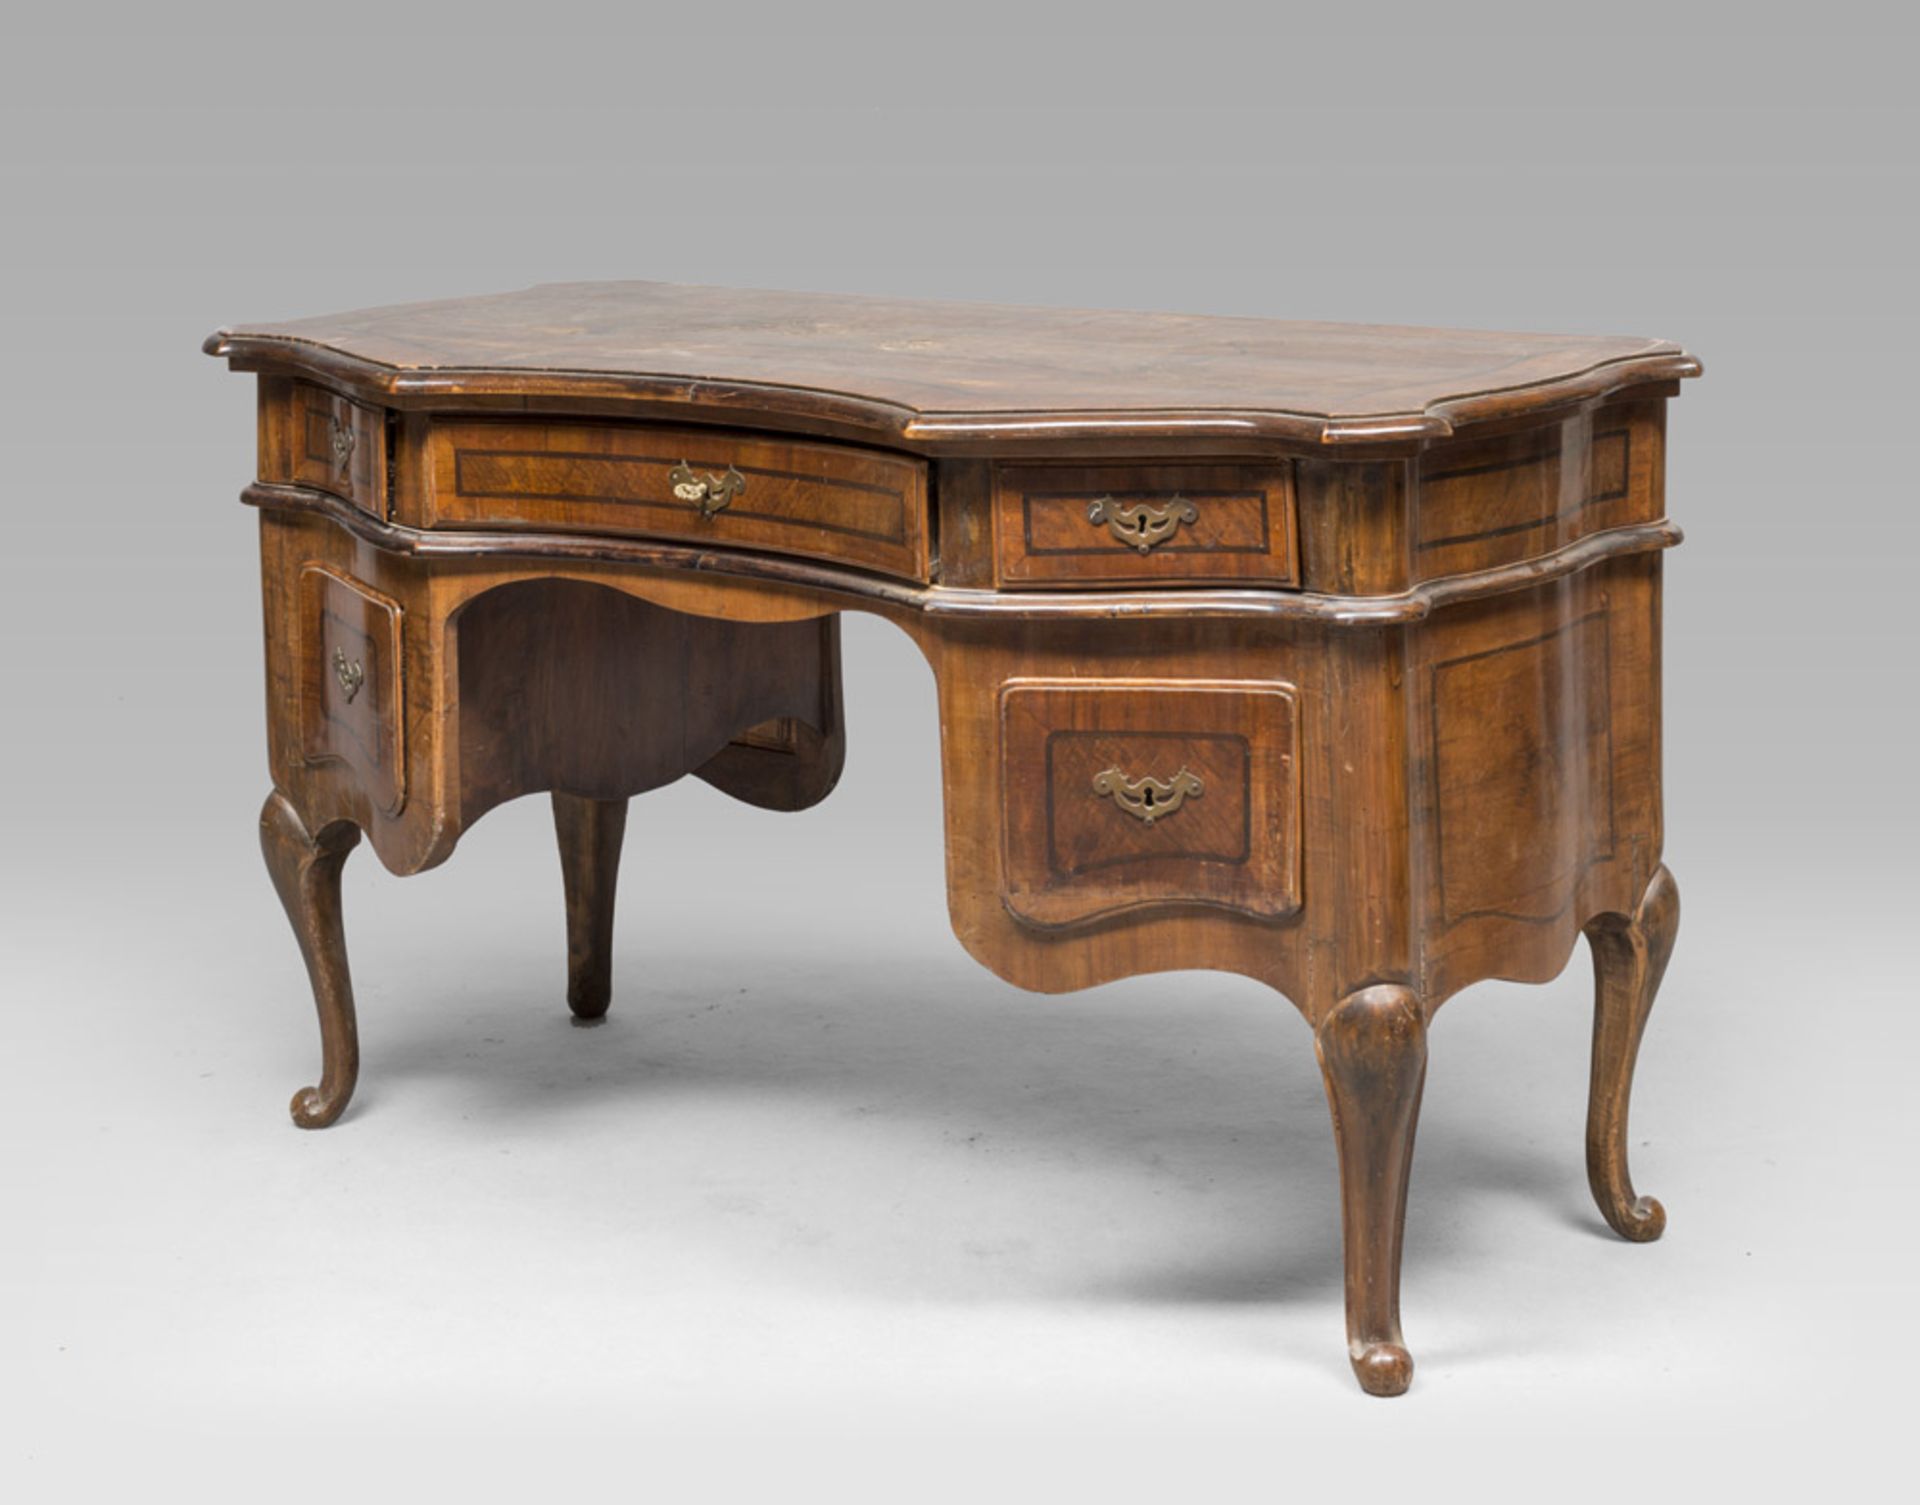 RARE WALNUT DESK, VENICE 18TH CENTURY with reserves and edgings in violet wood. Front with one